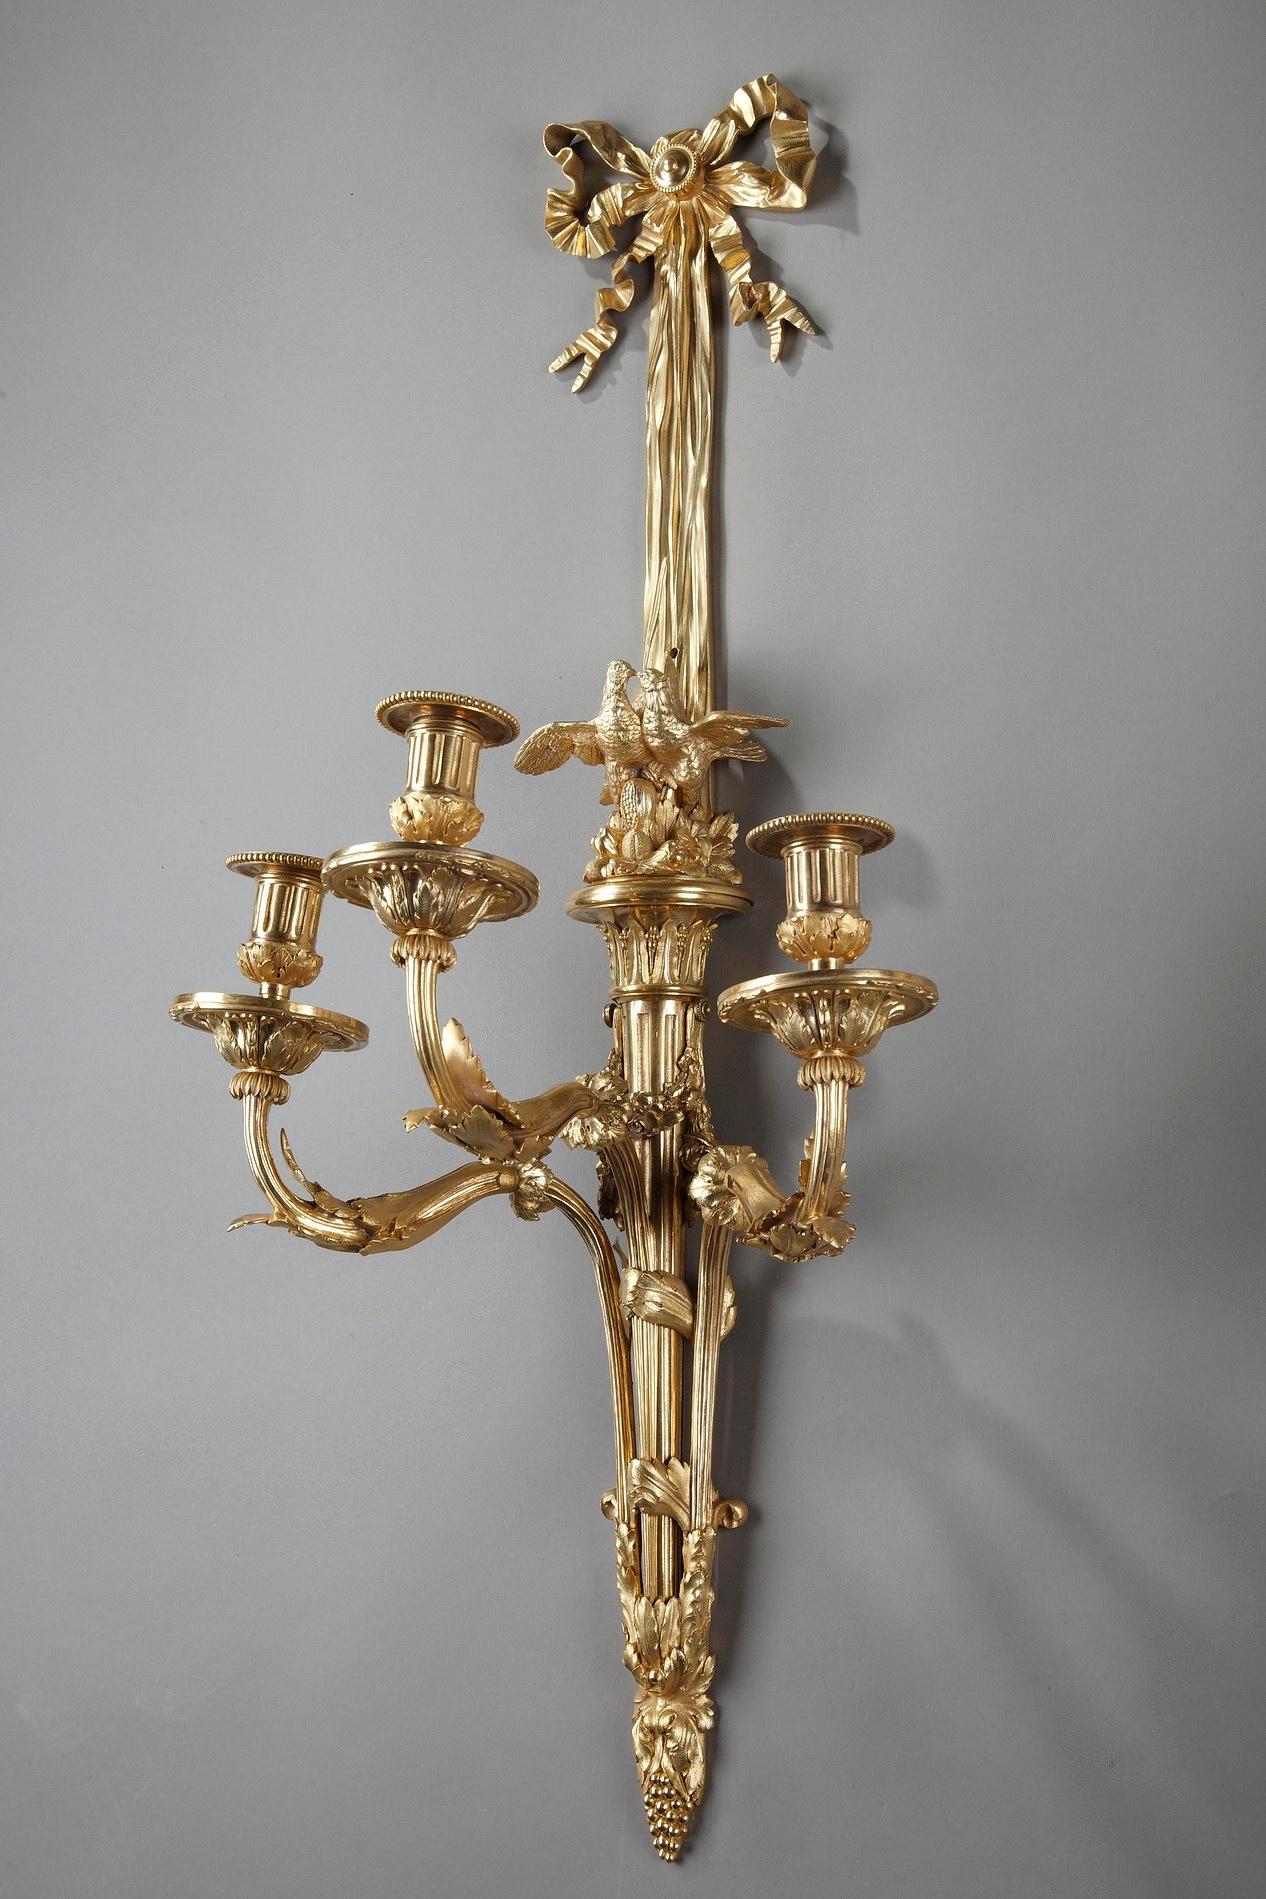 Pair of Louis XVI-style wall sconces crafted entirely of gilded bronze, with three-light decorated with acanthus leaves. The fluted stem highlighted with birds on a fruit basket, is surmounted by a long, descending ribbon bow. Napoleon III